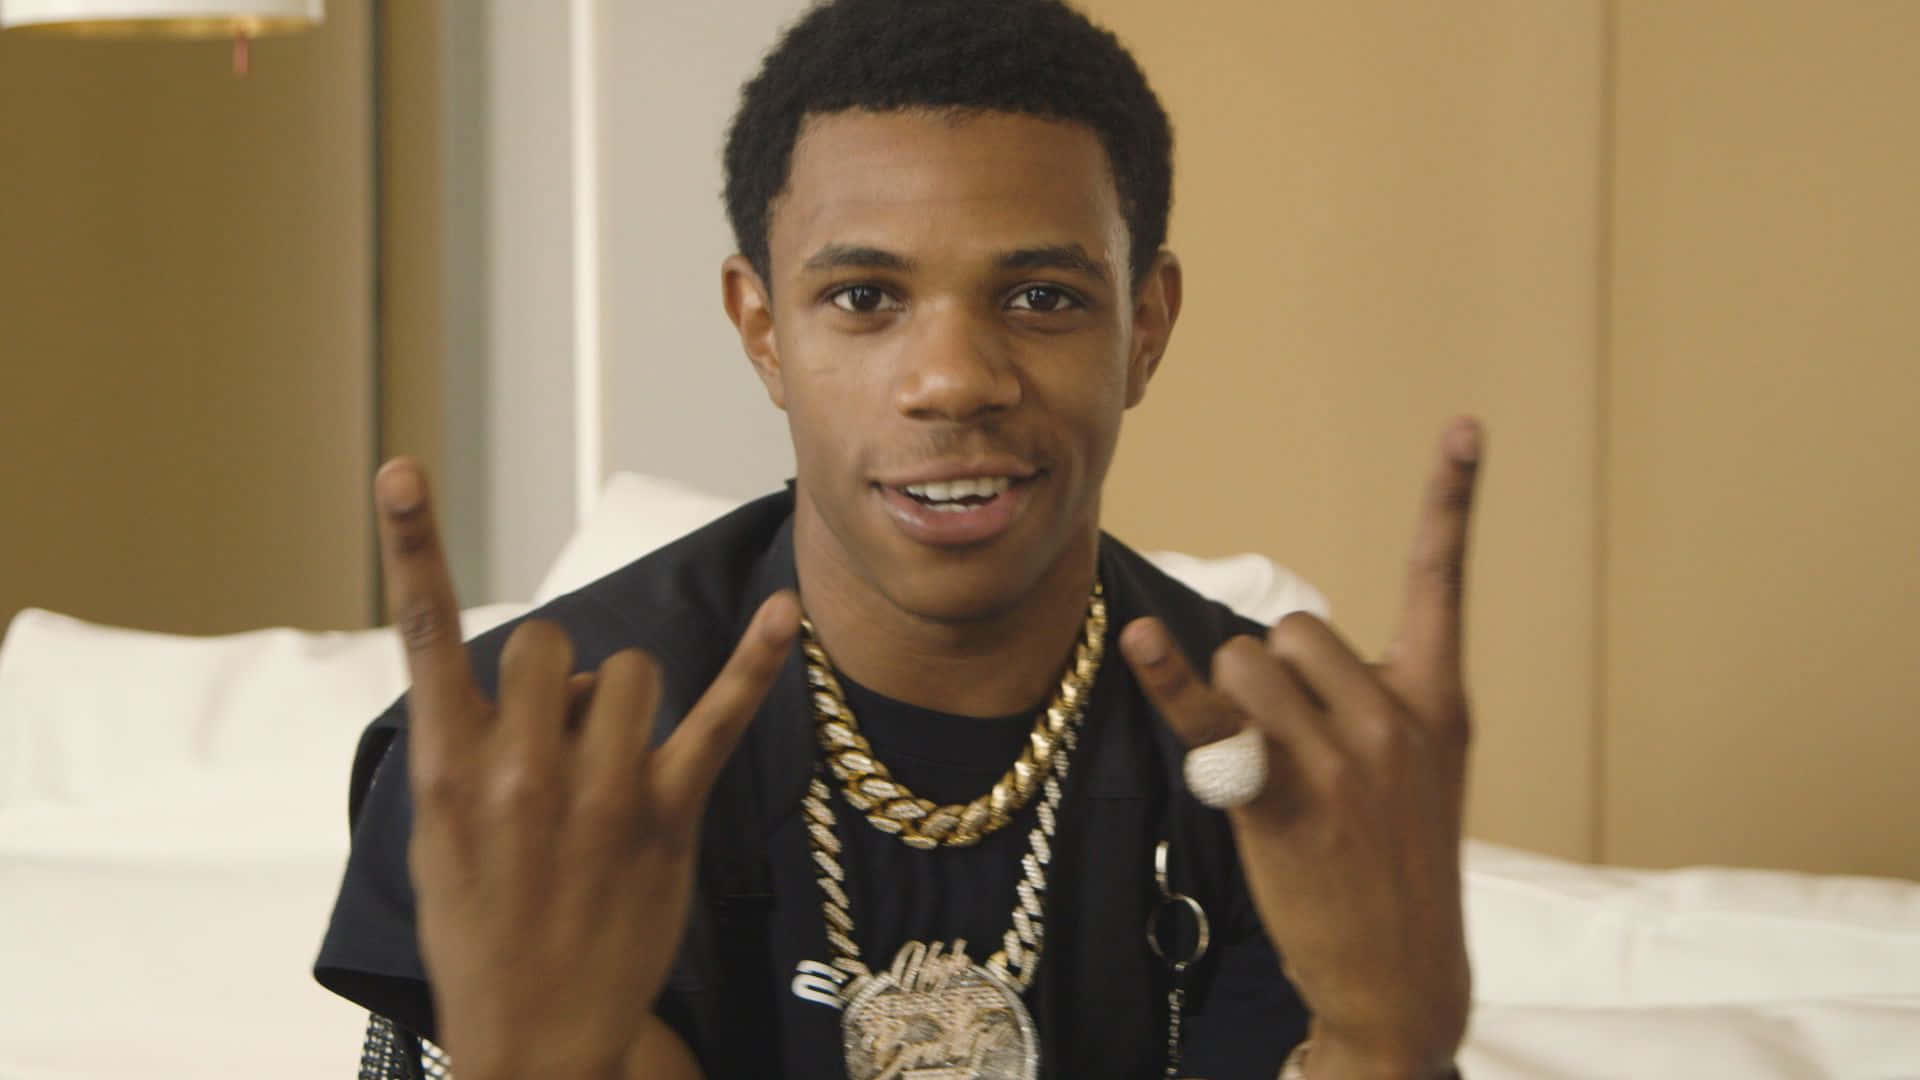 Download A Boogie Wit Da Hoodie captures his dramatic style on stage